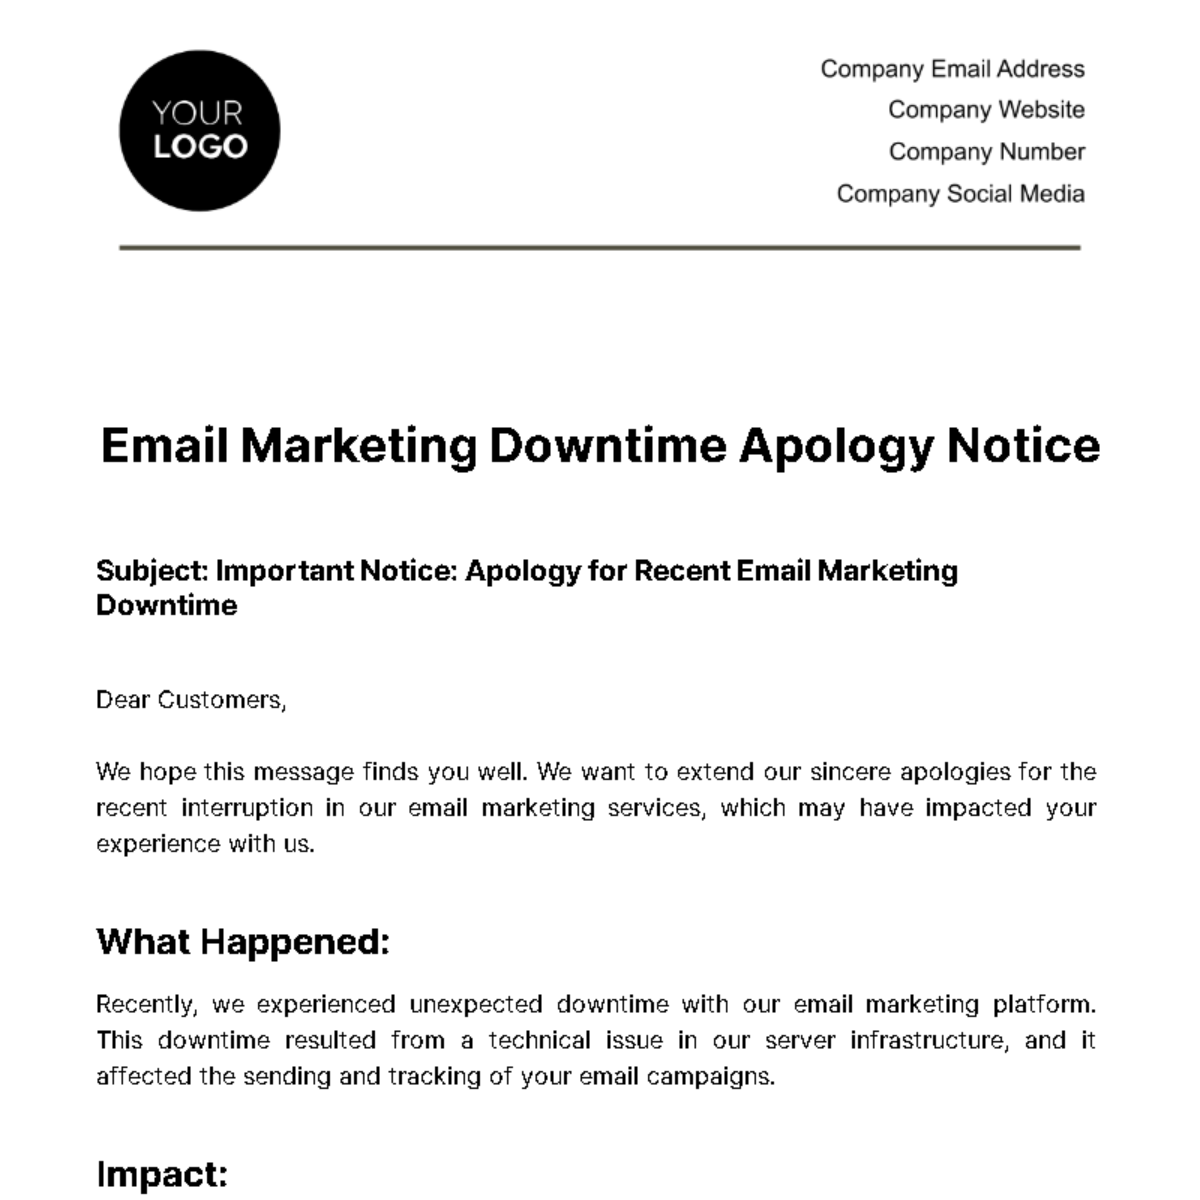 Email Marketing Downtime Apology Notice Template